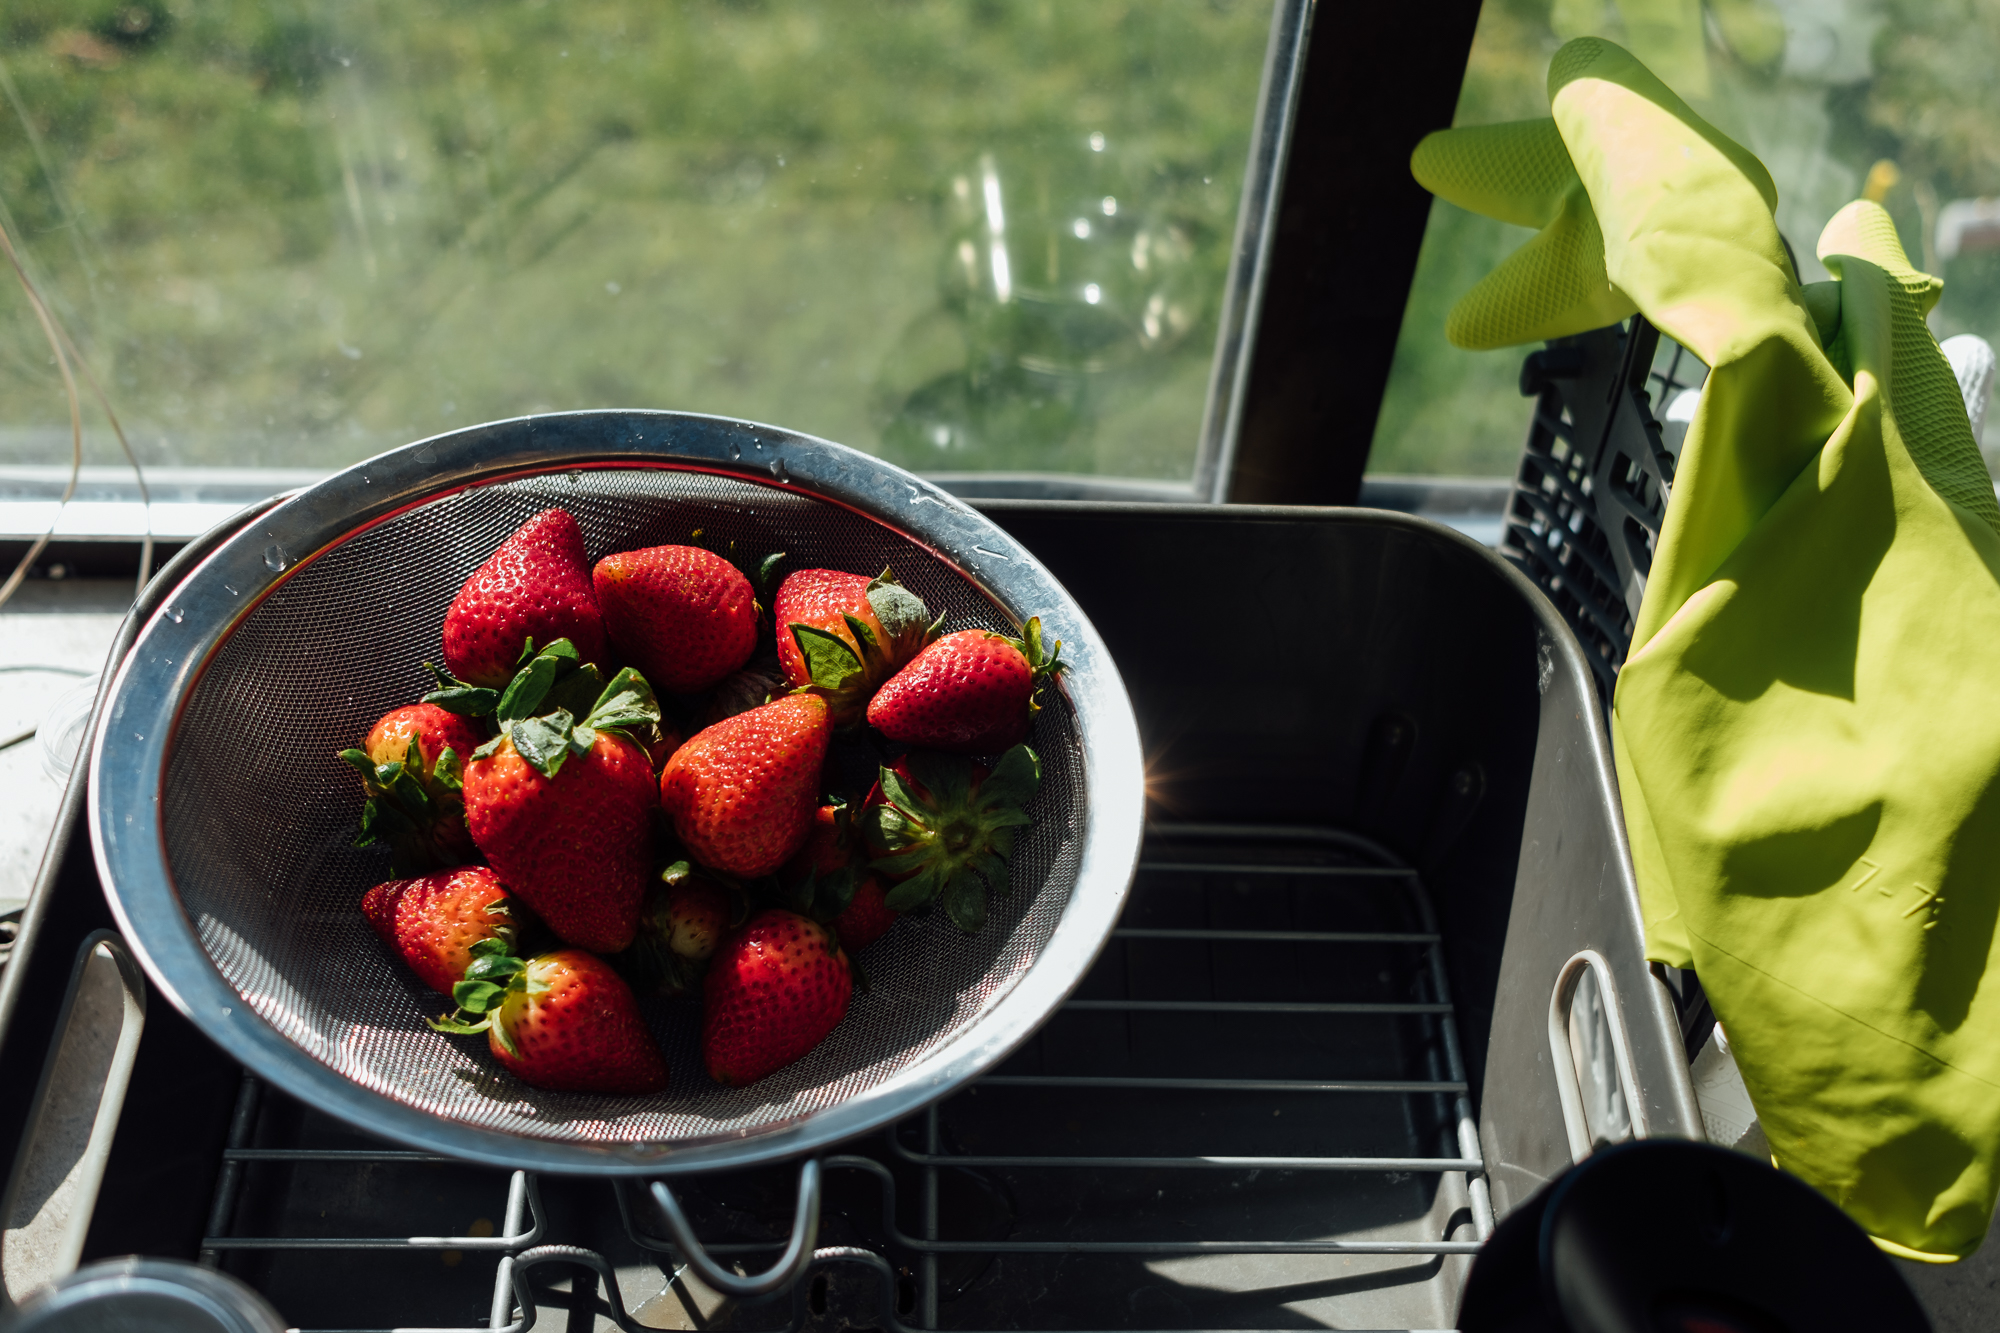 Strawberries drying in window - Documentary Family Photography